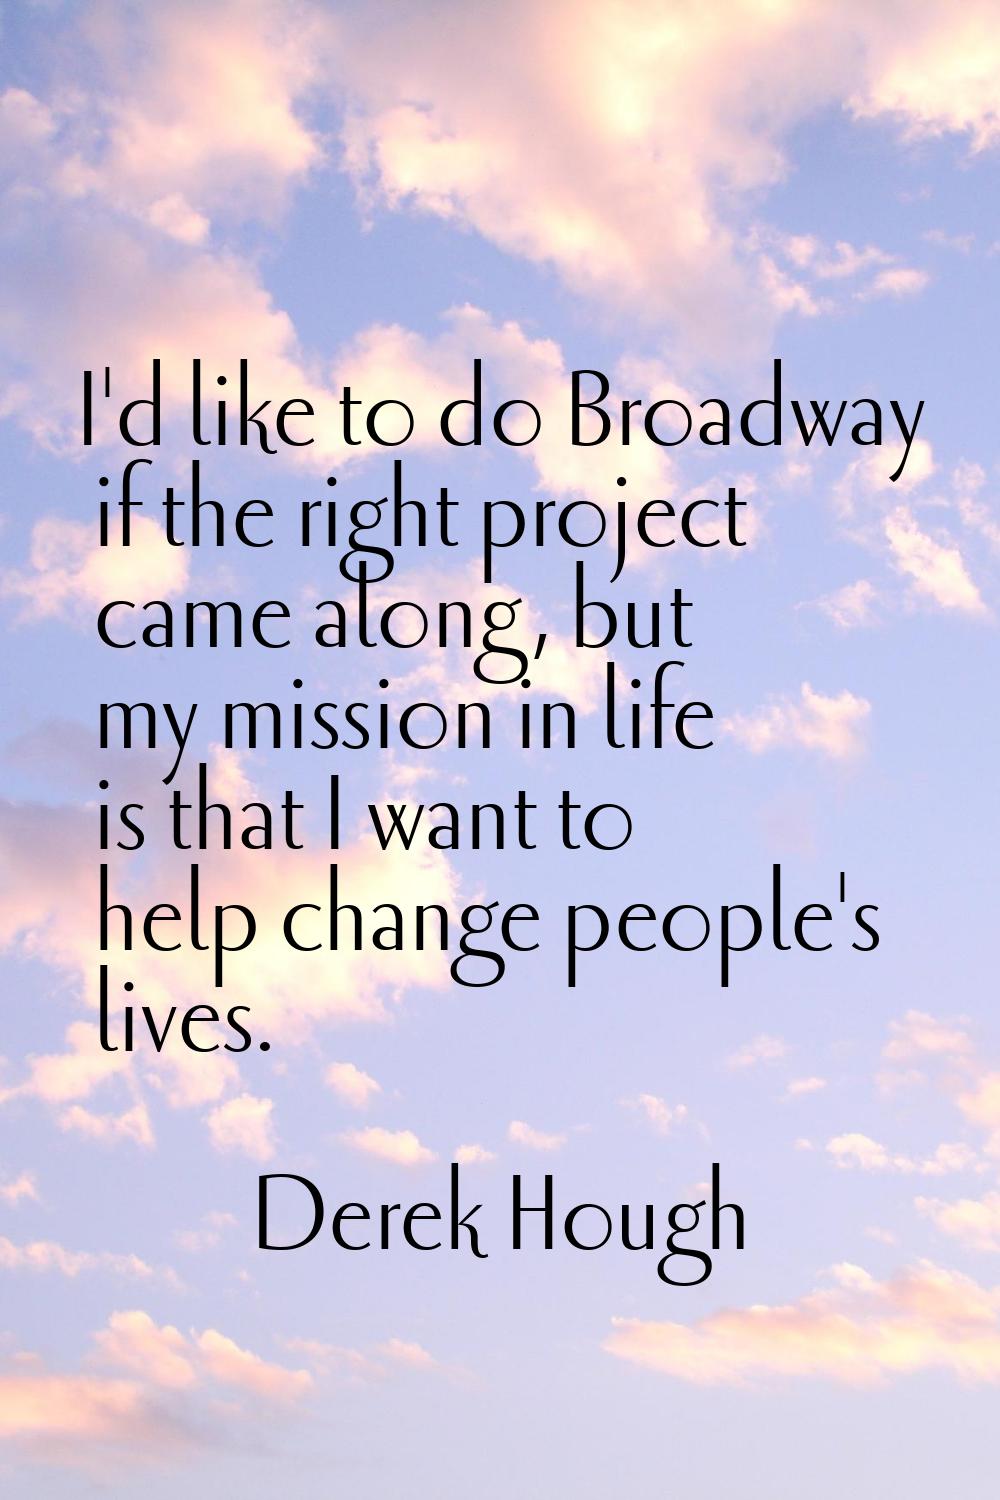 I'd like to do Broadway if the right project came along, but my mission in life is that I want to h